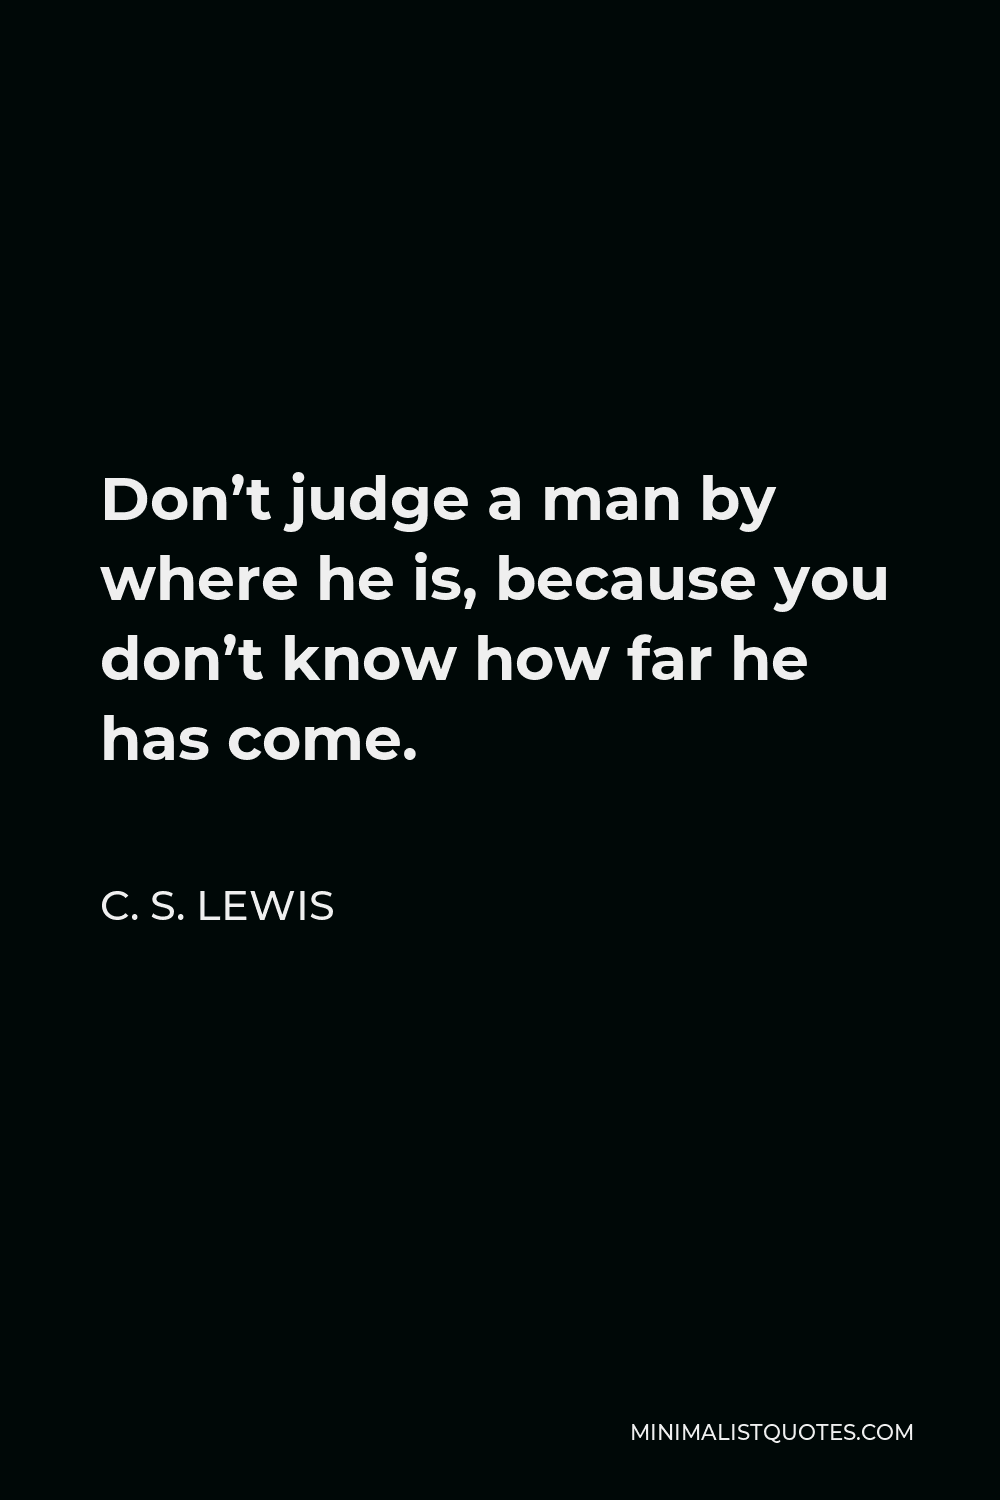 C. S. Lewis Quote - Don’t judge a man by where he is, because you don’t know how far he has come.